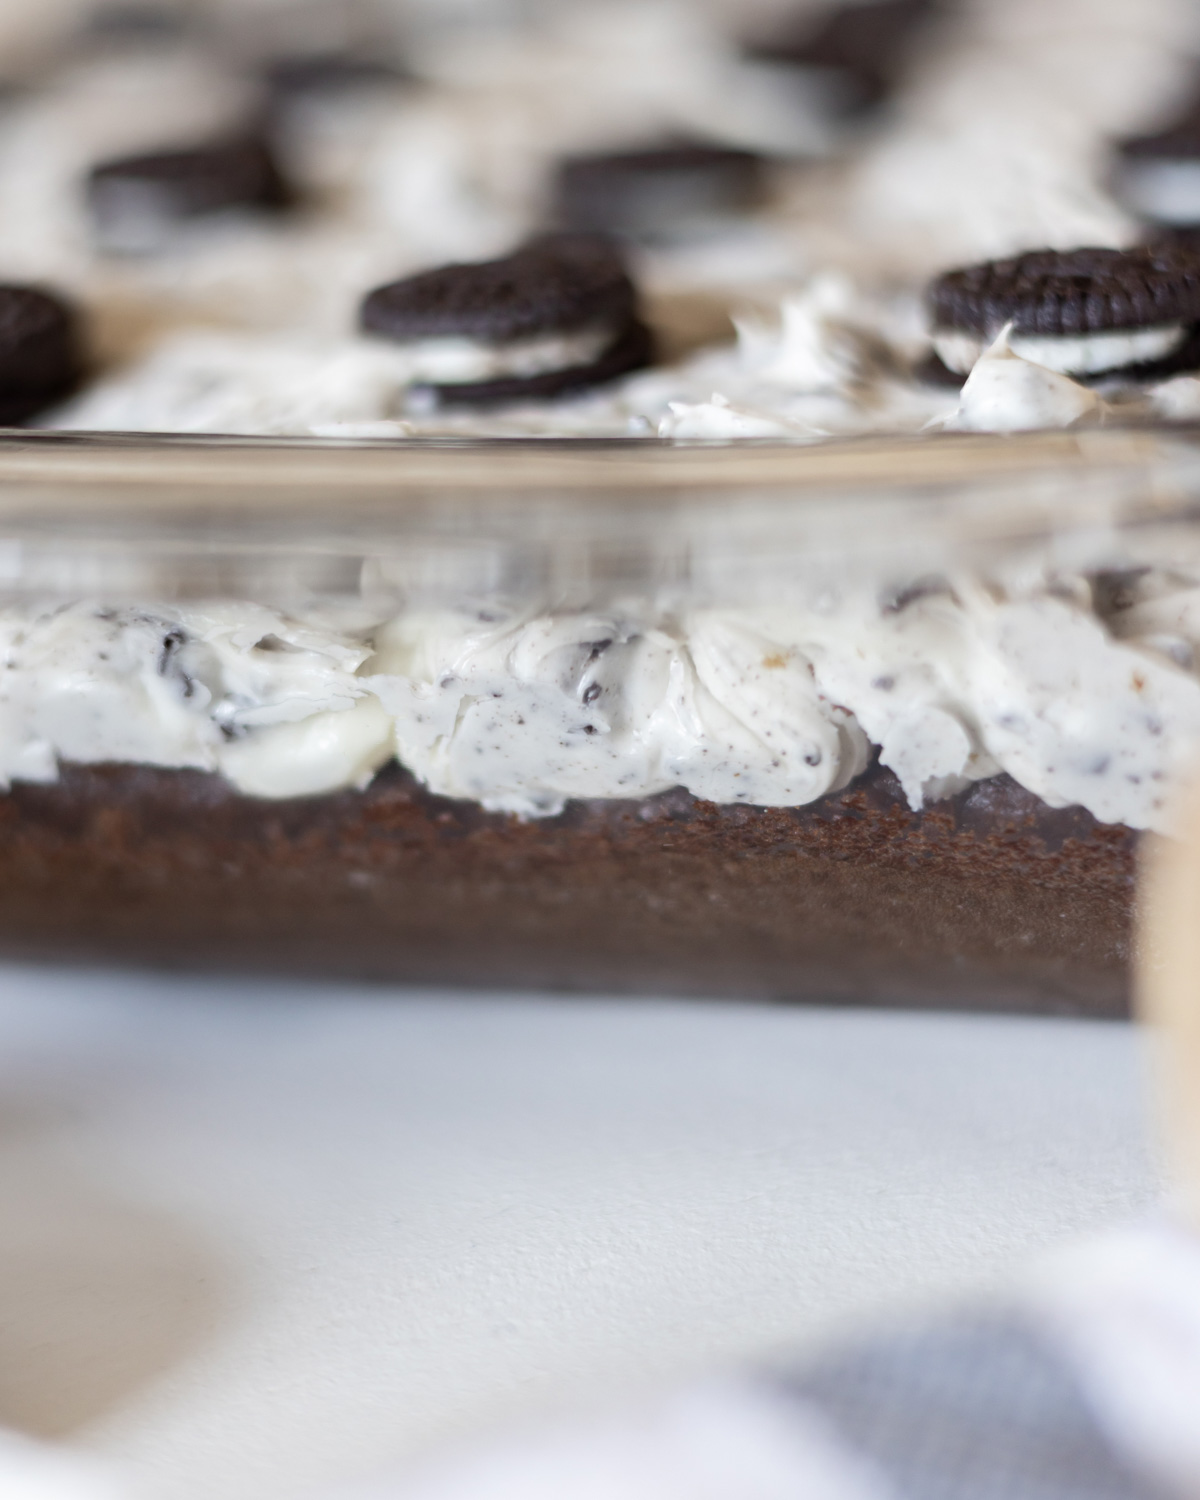 Thick and fluffy Oreo icing topping.